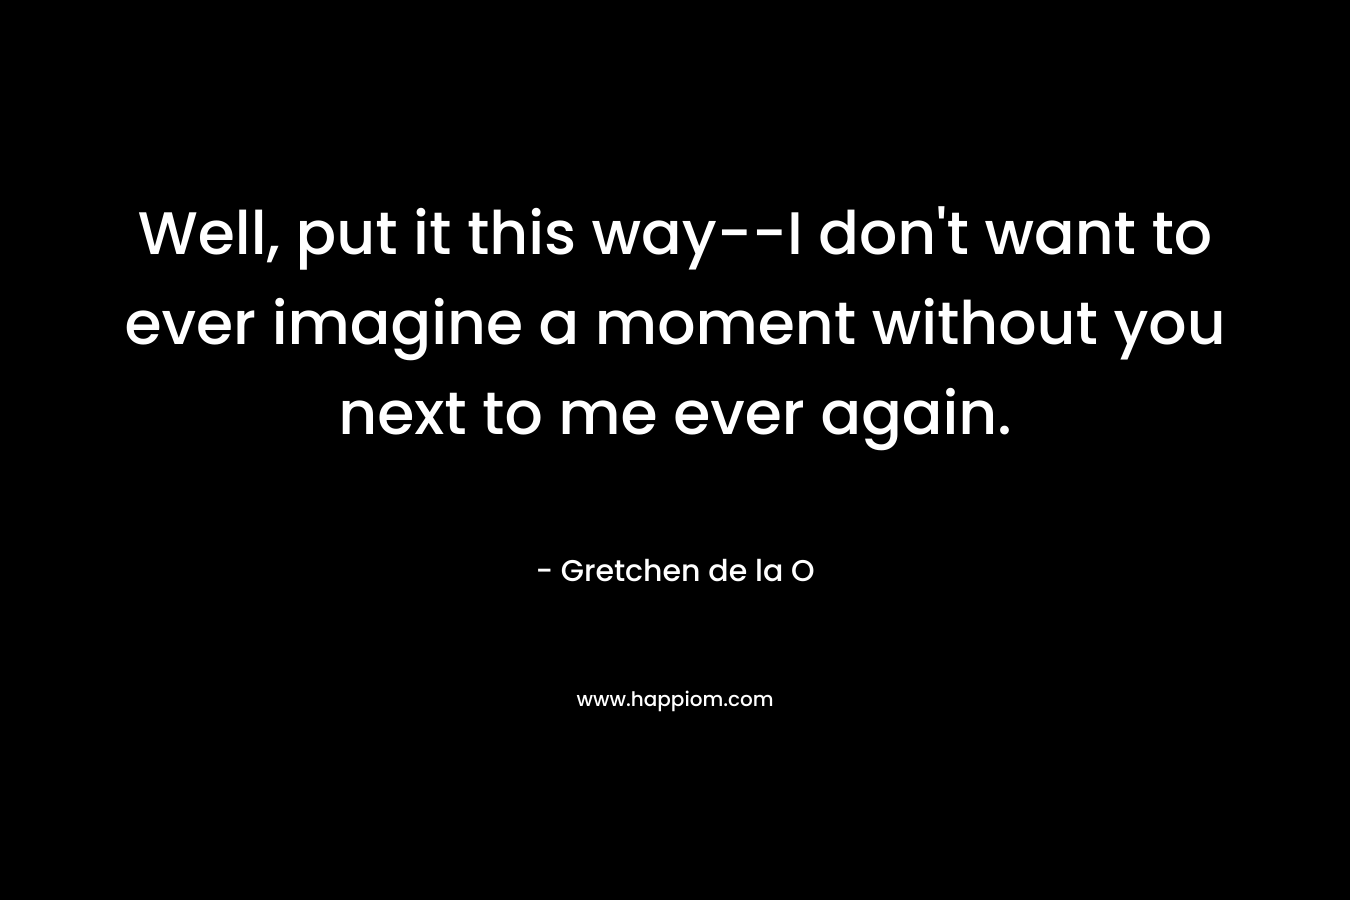 Well, put it this way–I don’t want to ever imagine a moment without you next to me ever again. – Gretchen de la O